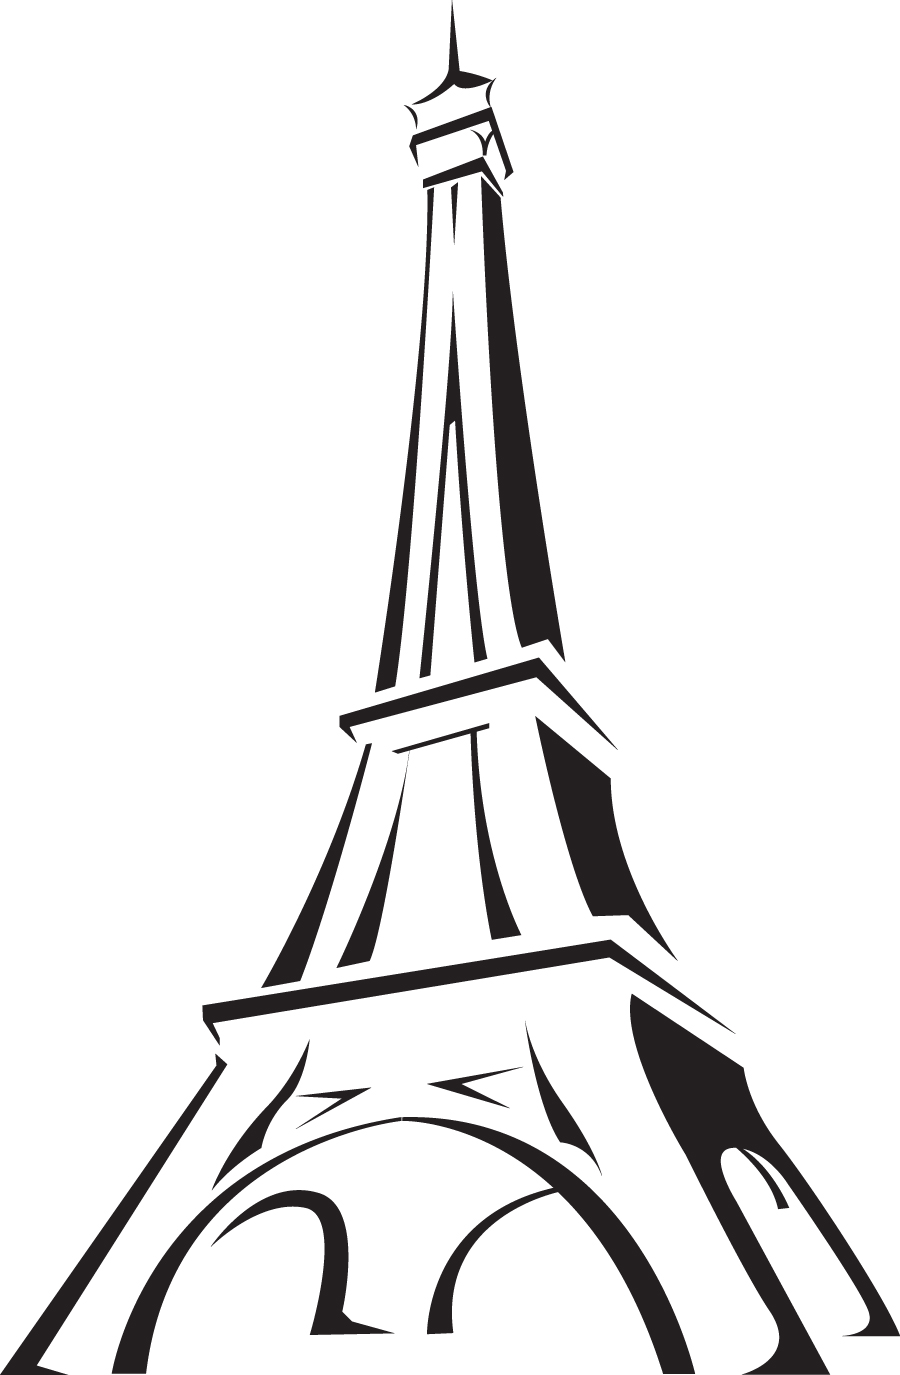 Eiffel tower clipart png